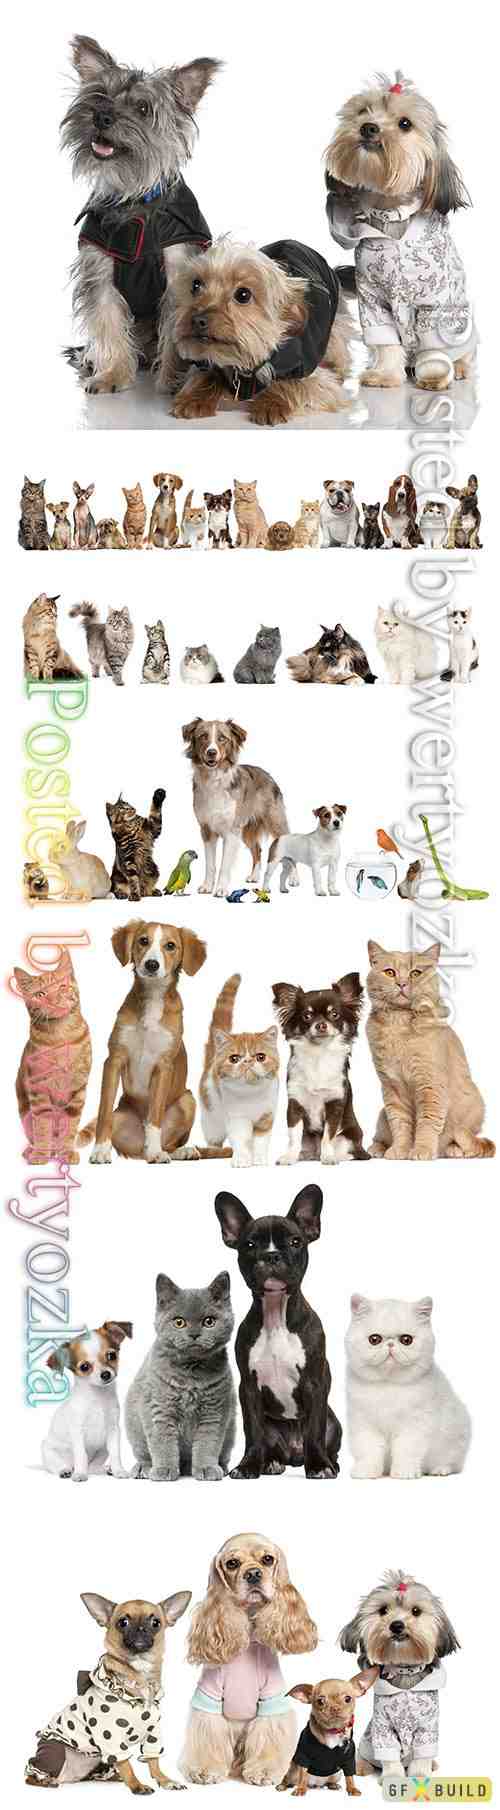 Cats and dogs beautiful stock photo